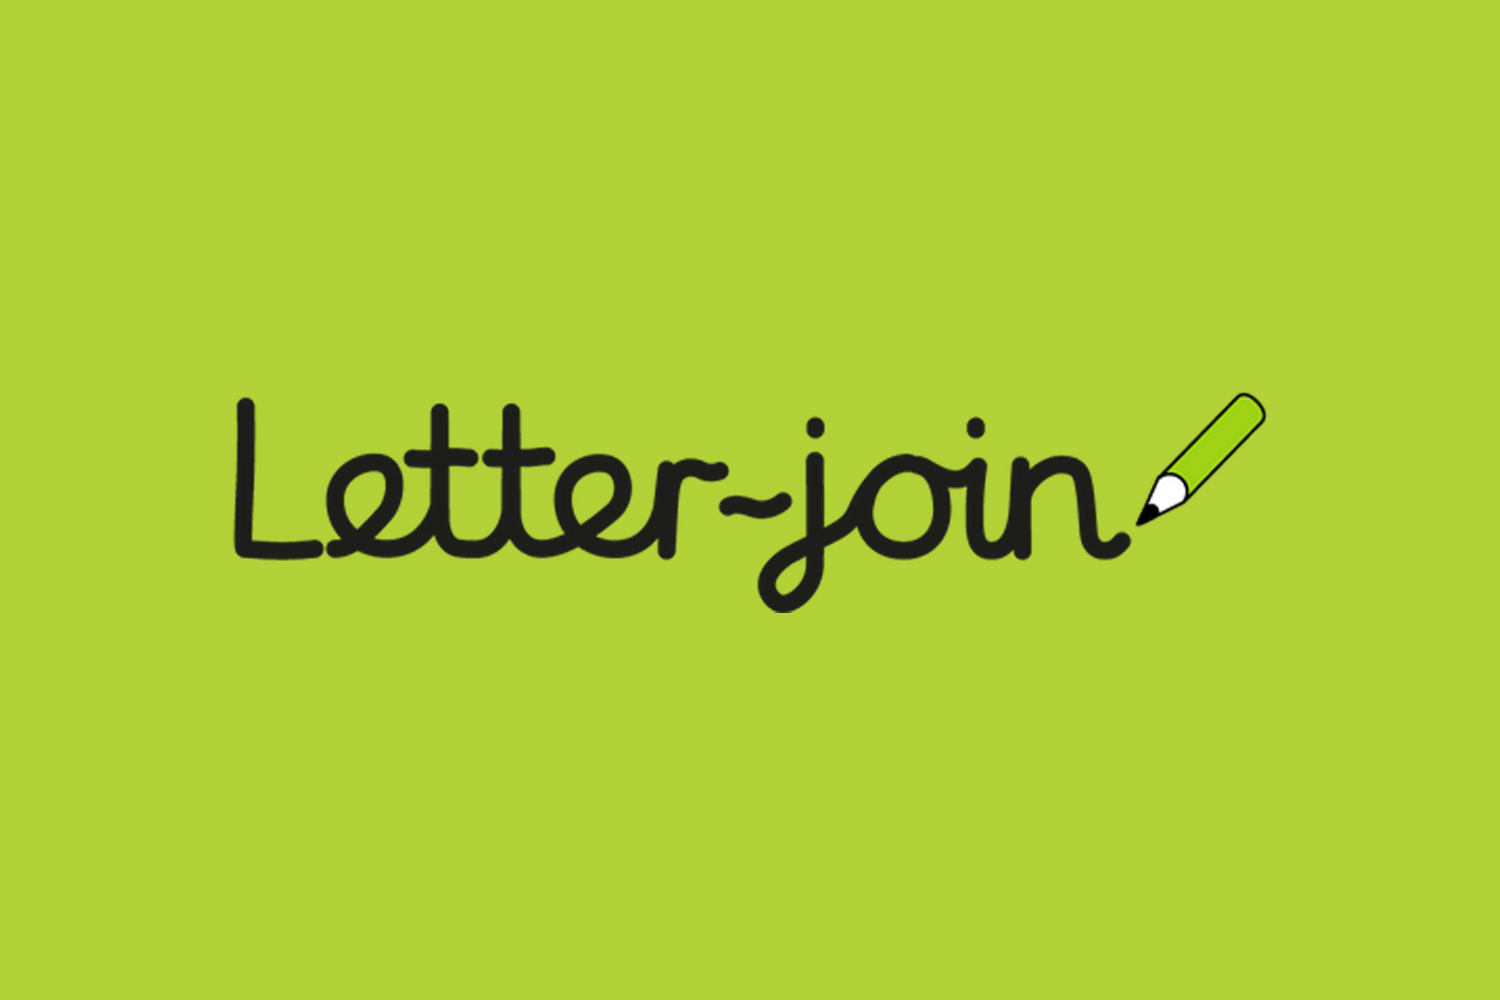 Letter-Join - Home Learning School